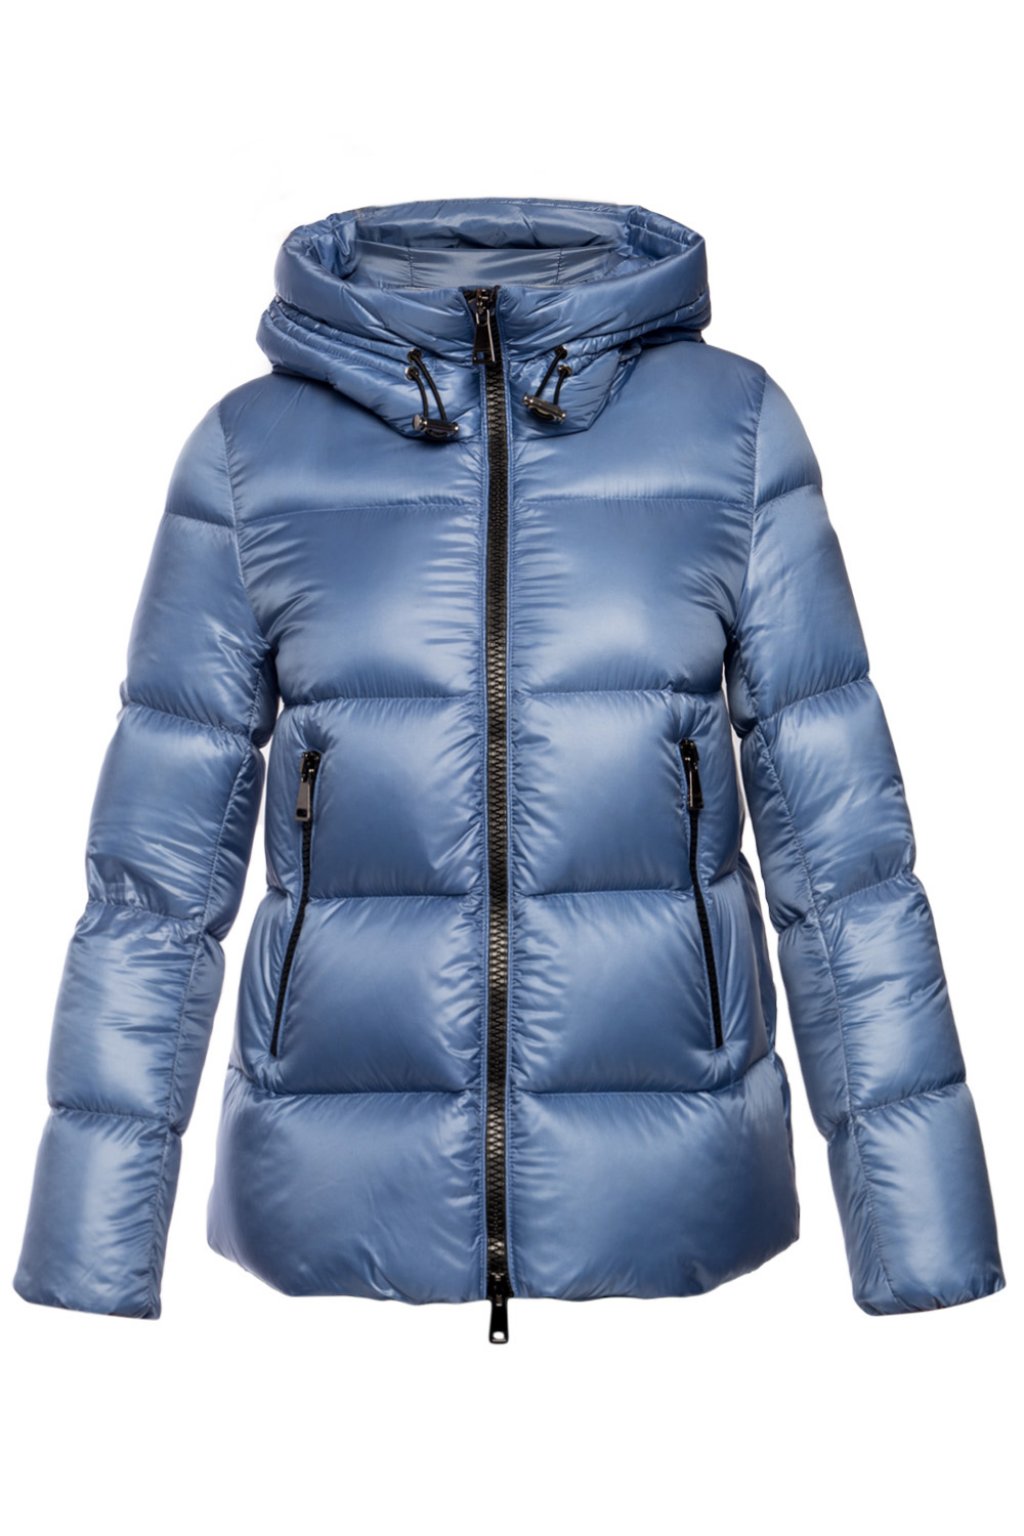 Seritte' quilted down jacket Moncler - Vitkac Italy